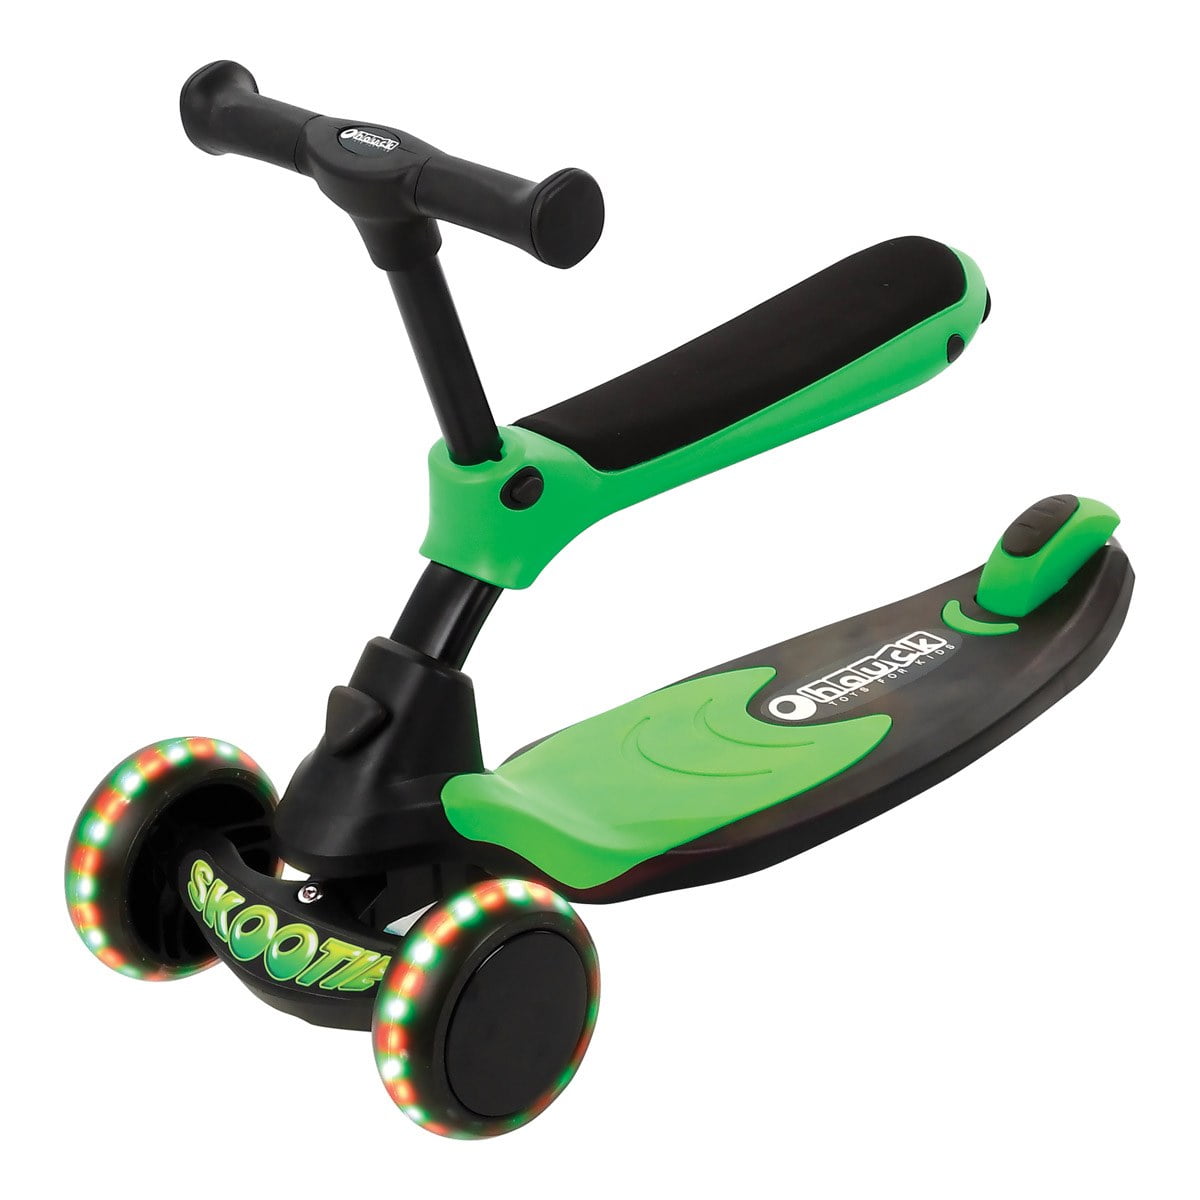 Hauck Skootie 2-in-1 Ride-On and Scooter - Neon Green